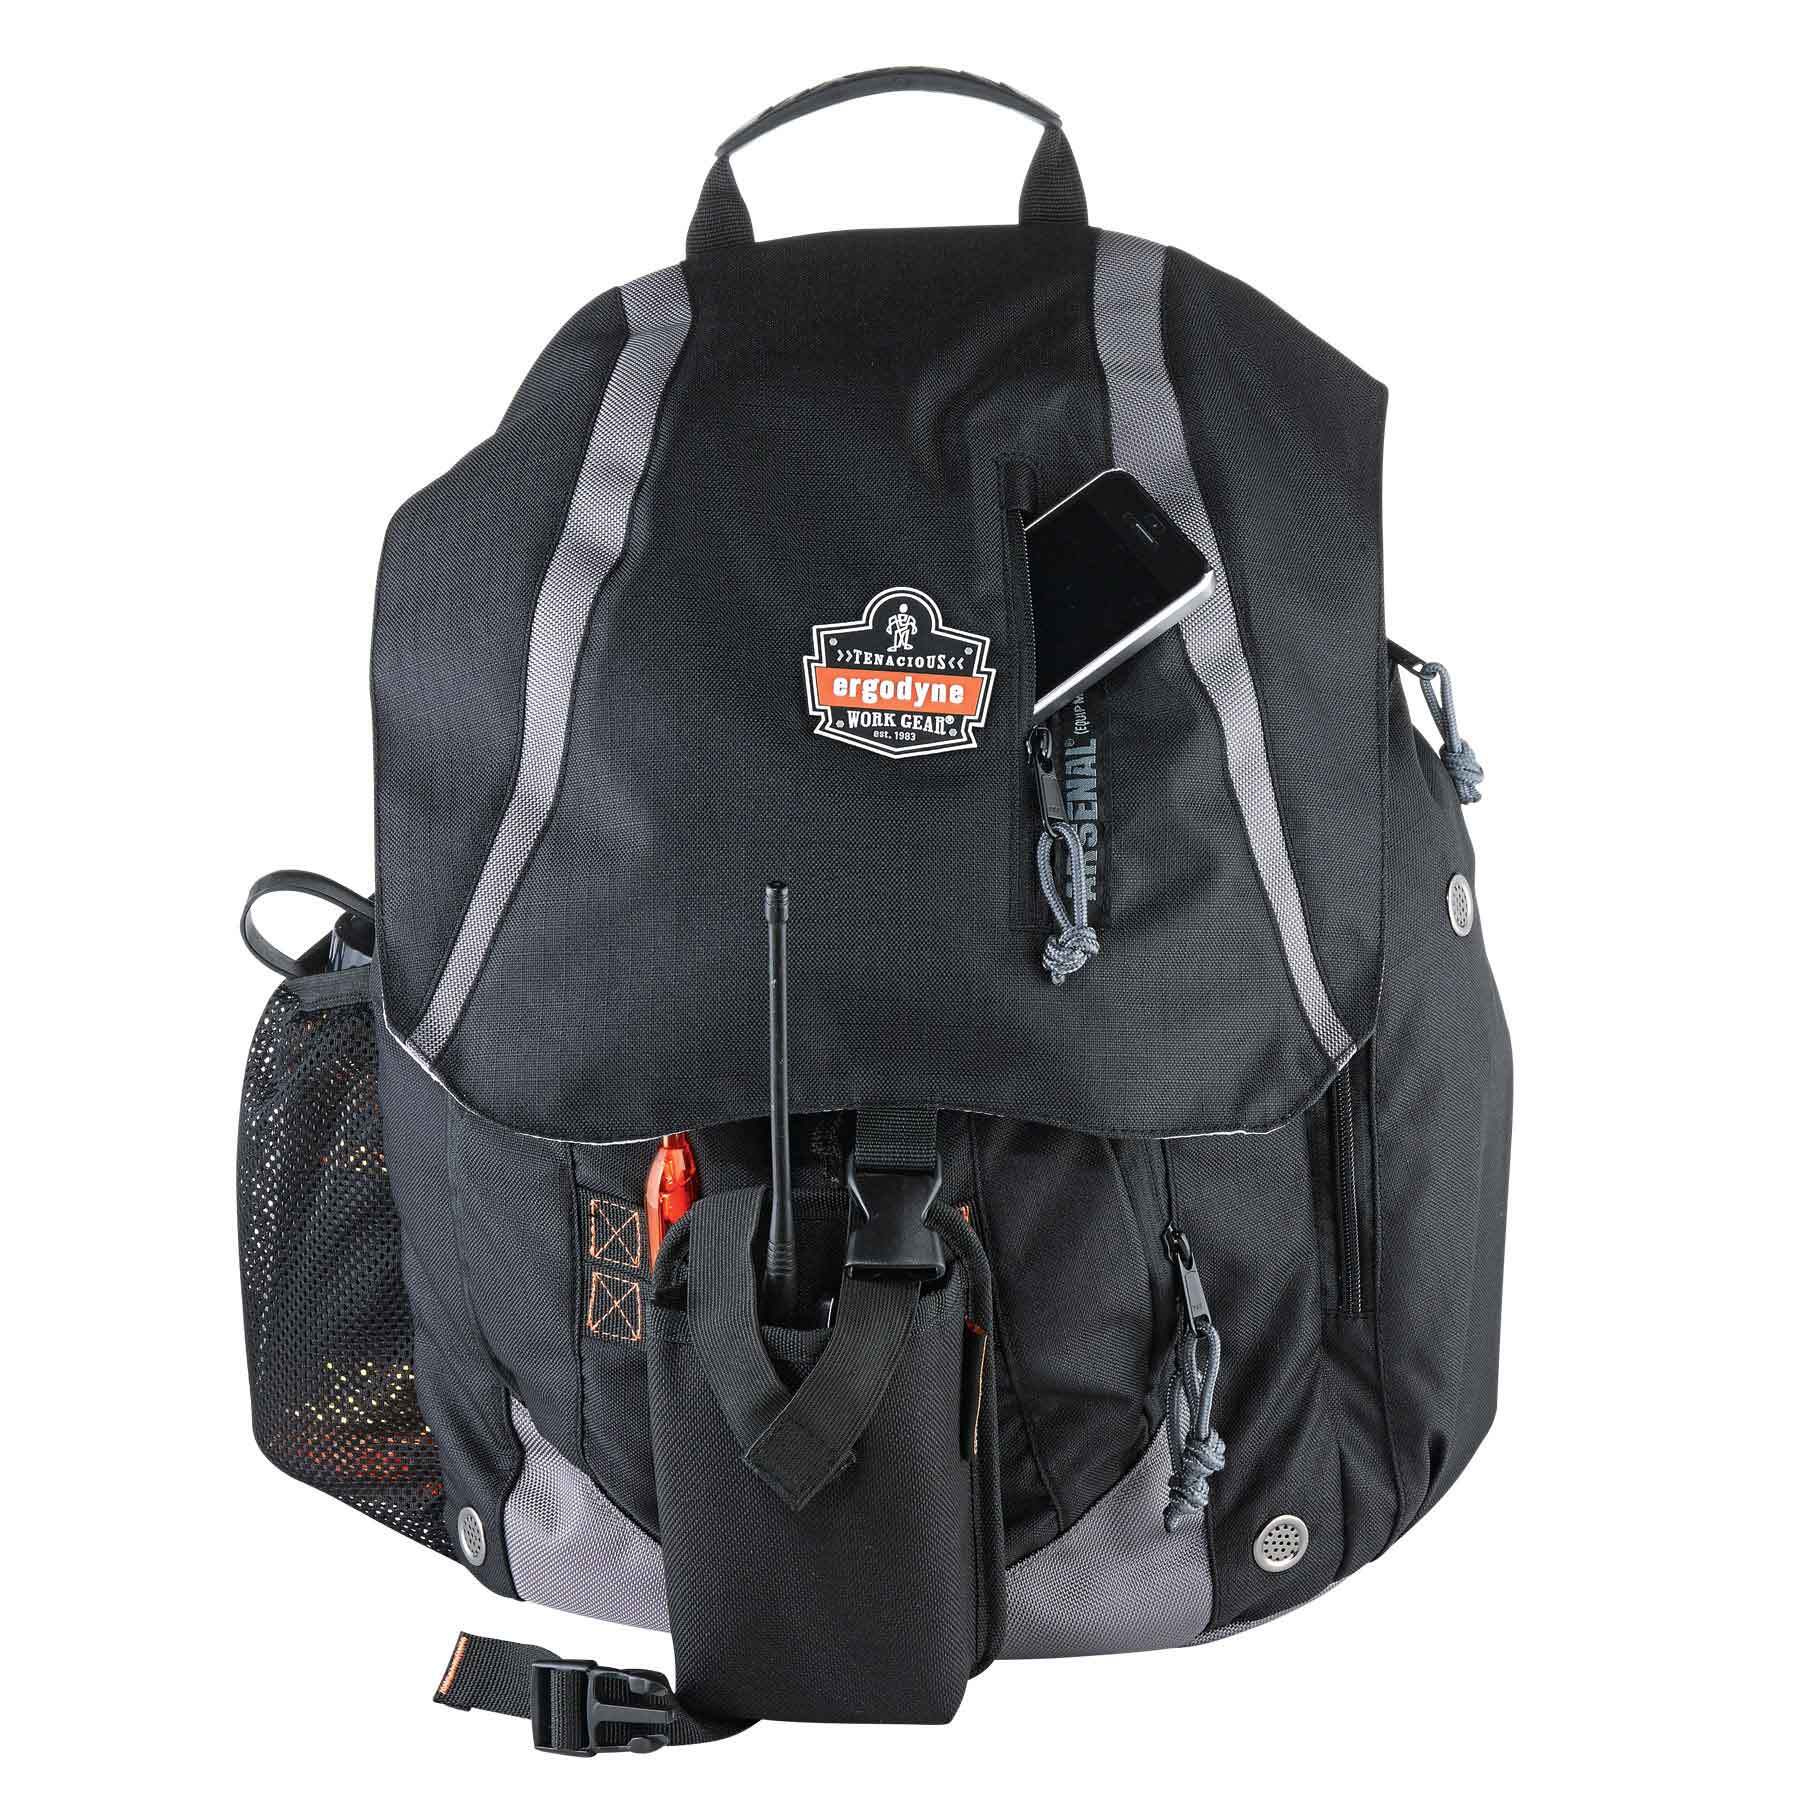 General Duty Gear Backpack - Bags/Totes